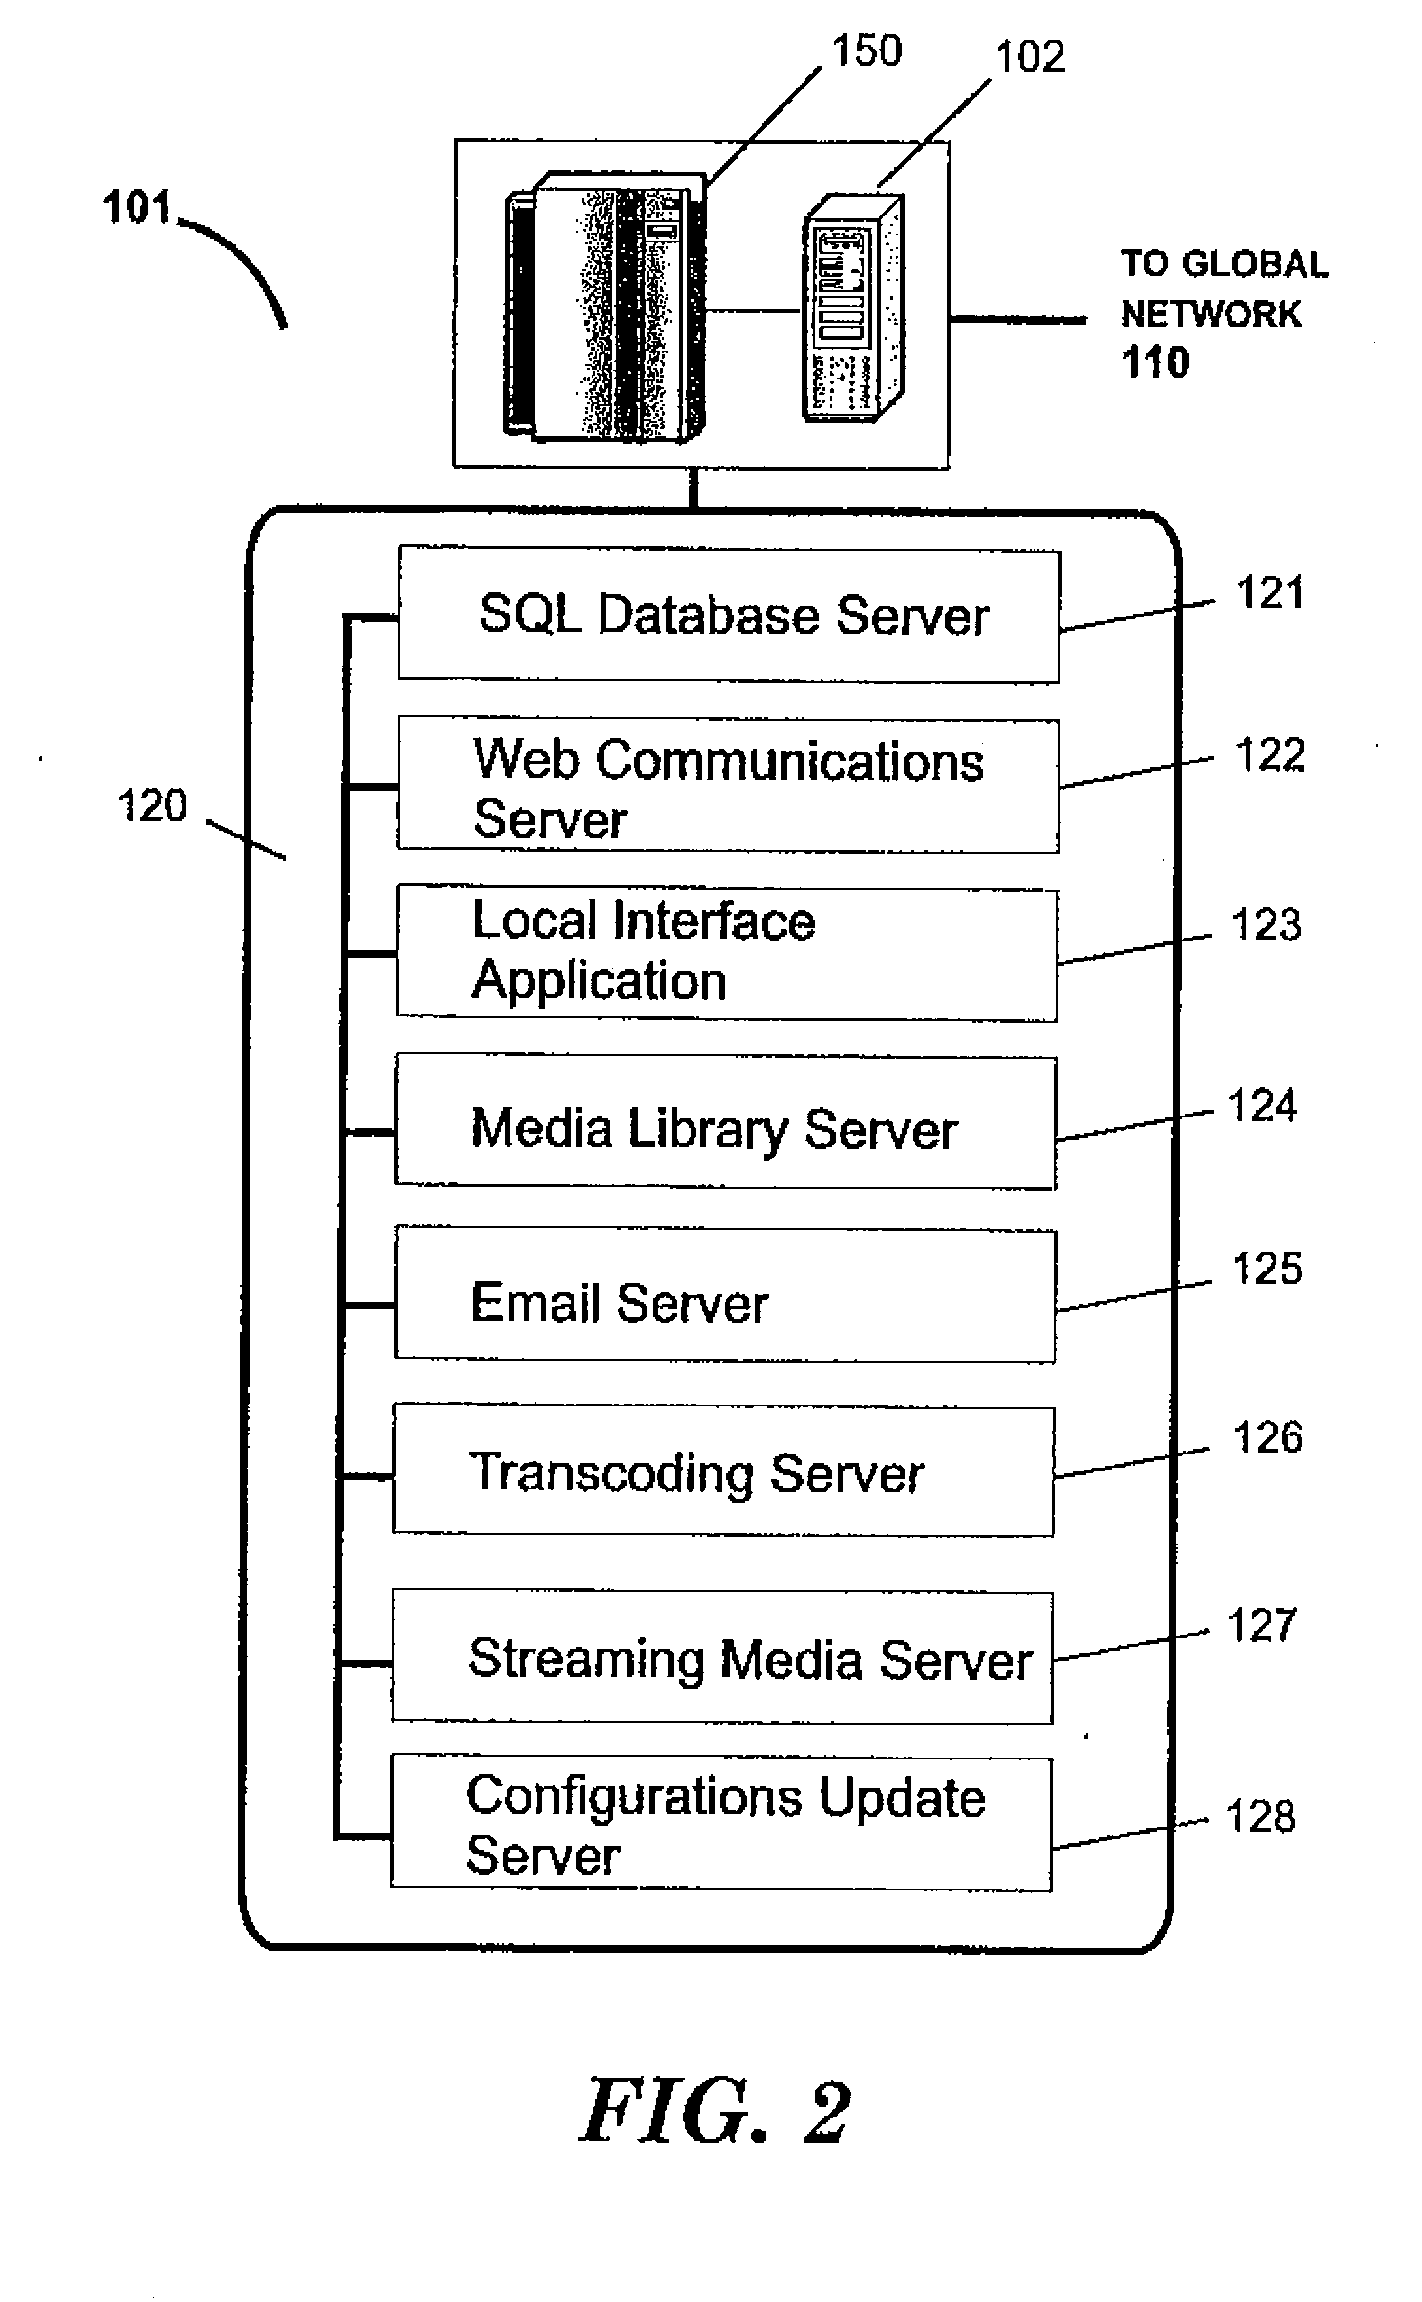 Enterprise network system for programmable electronic displays